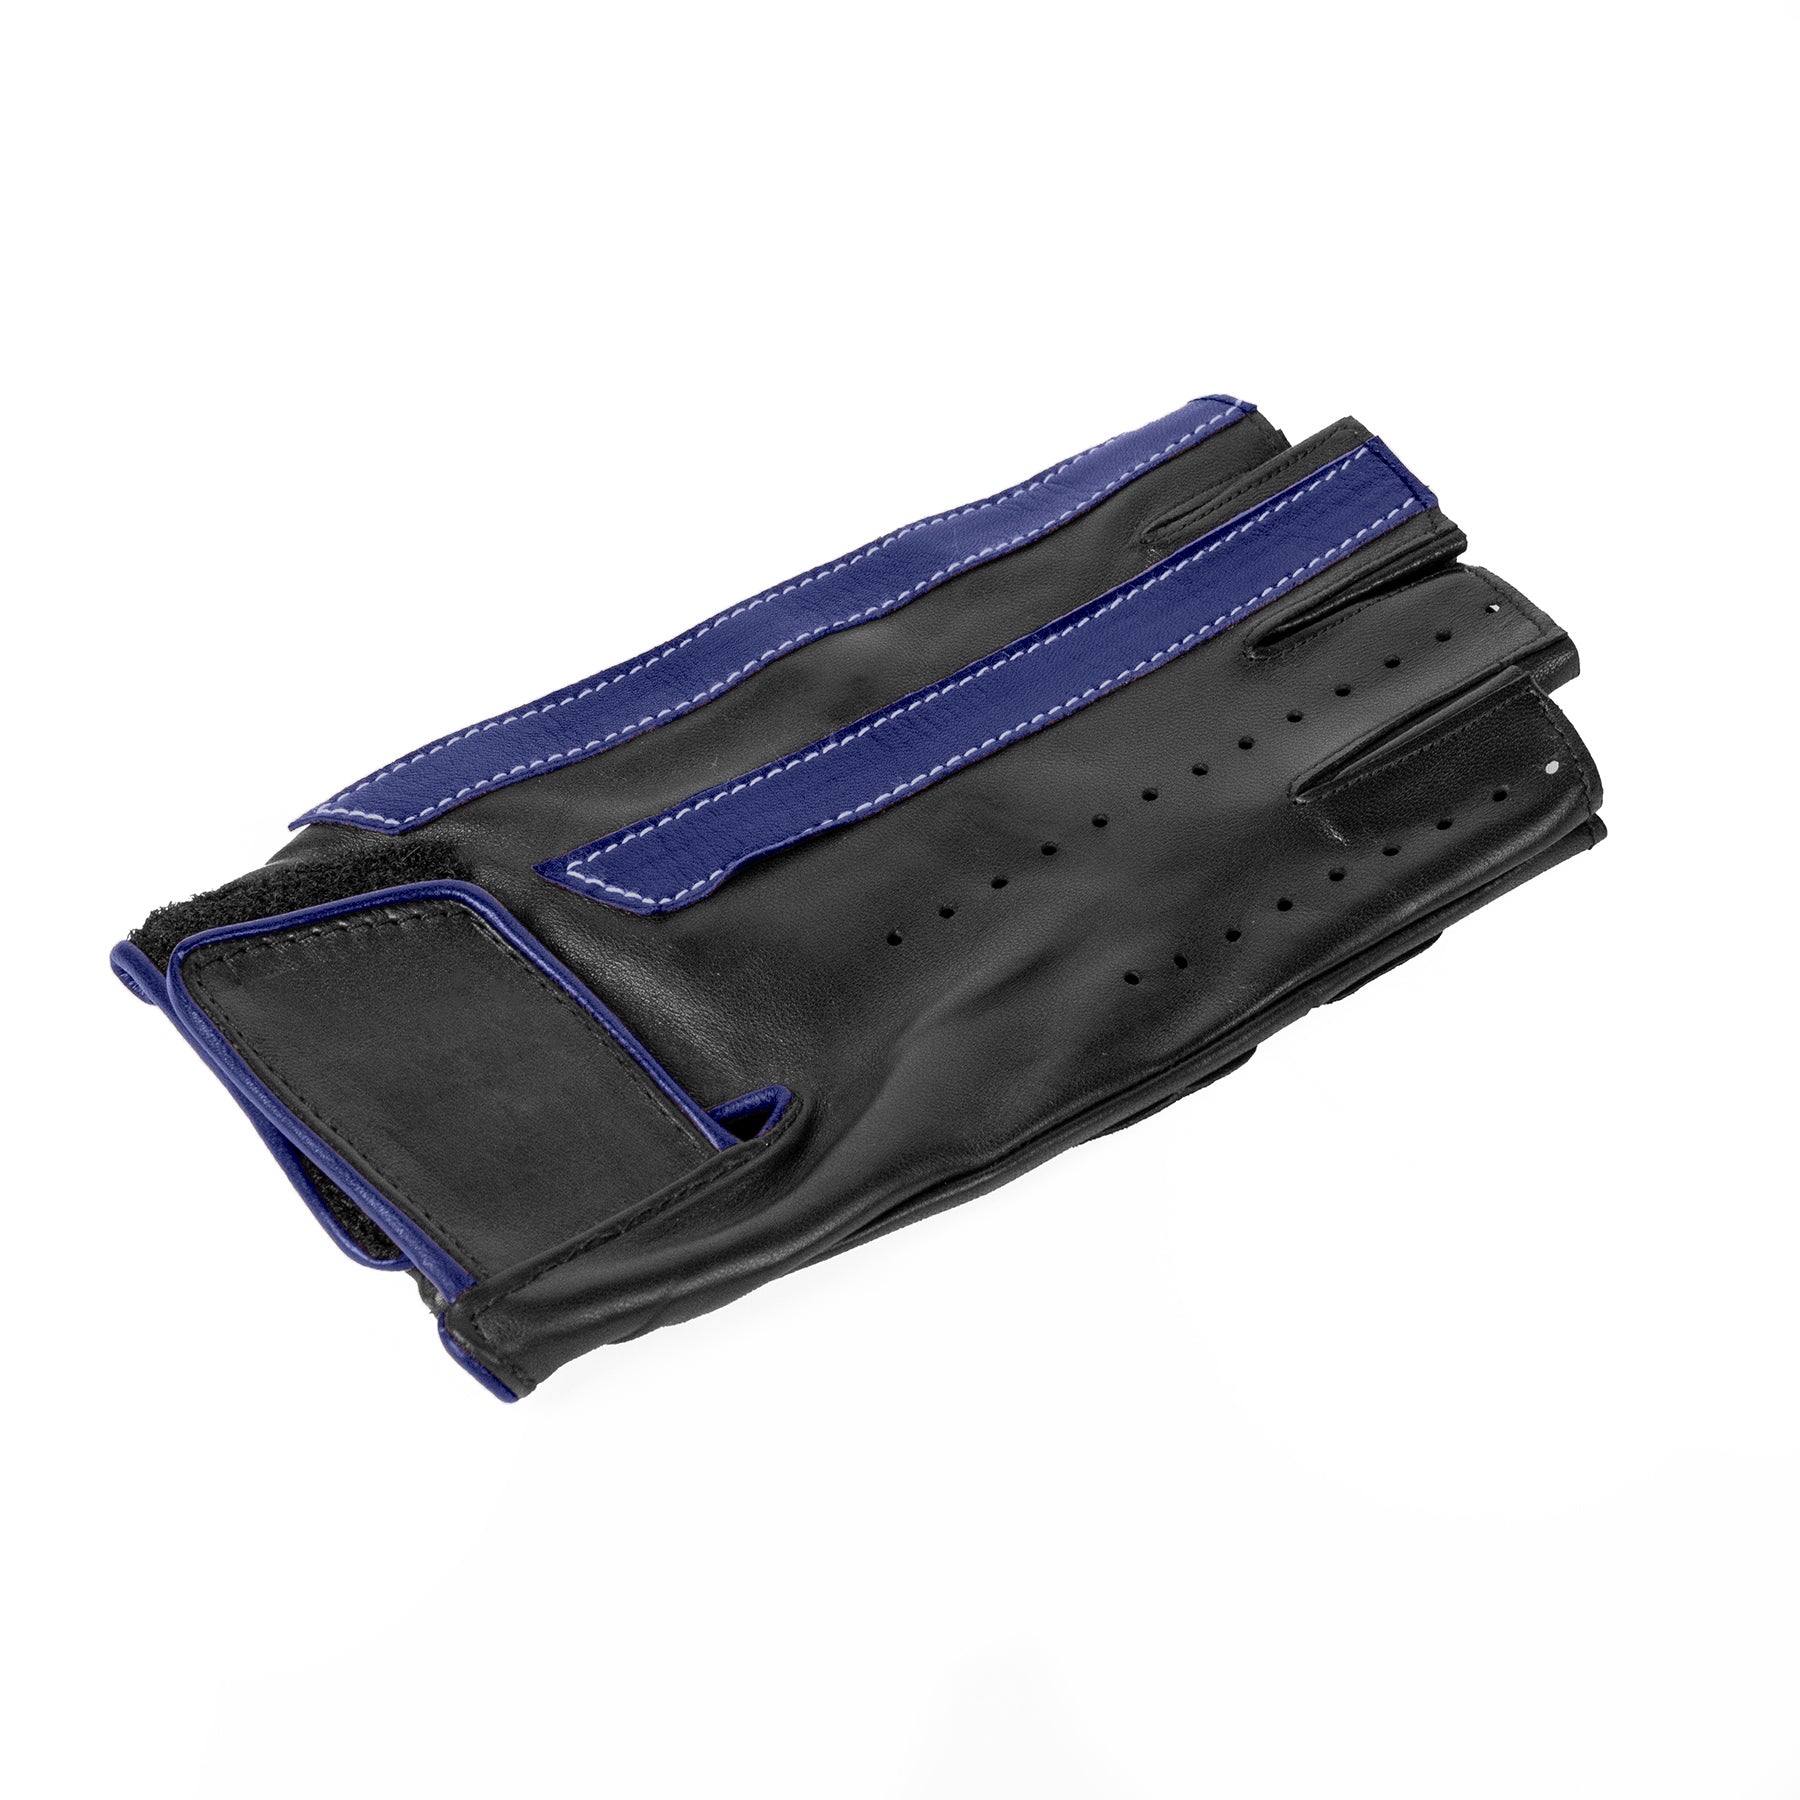 Men's unlined half fingers driving gloves in black nappa leather with blue leather strips